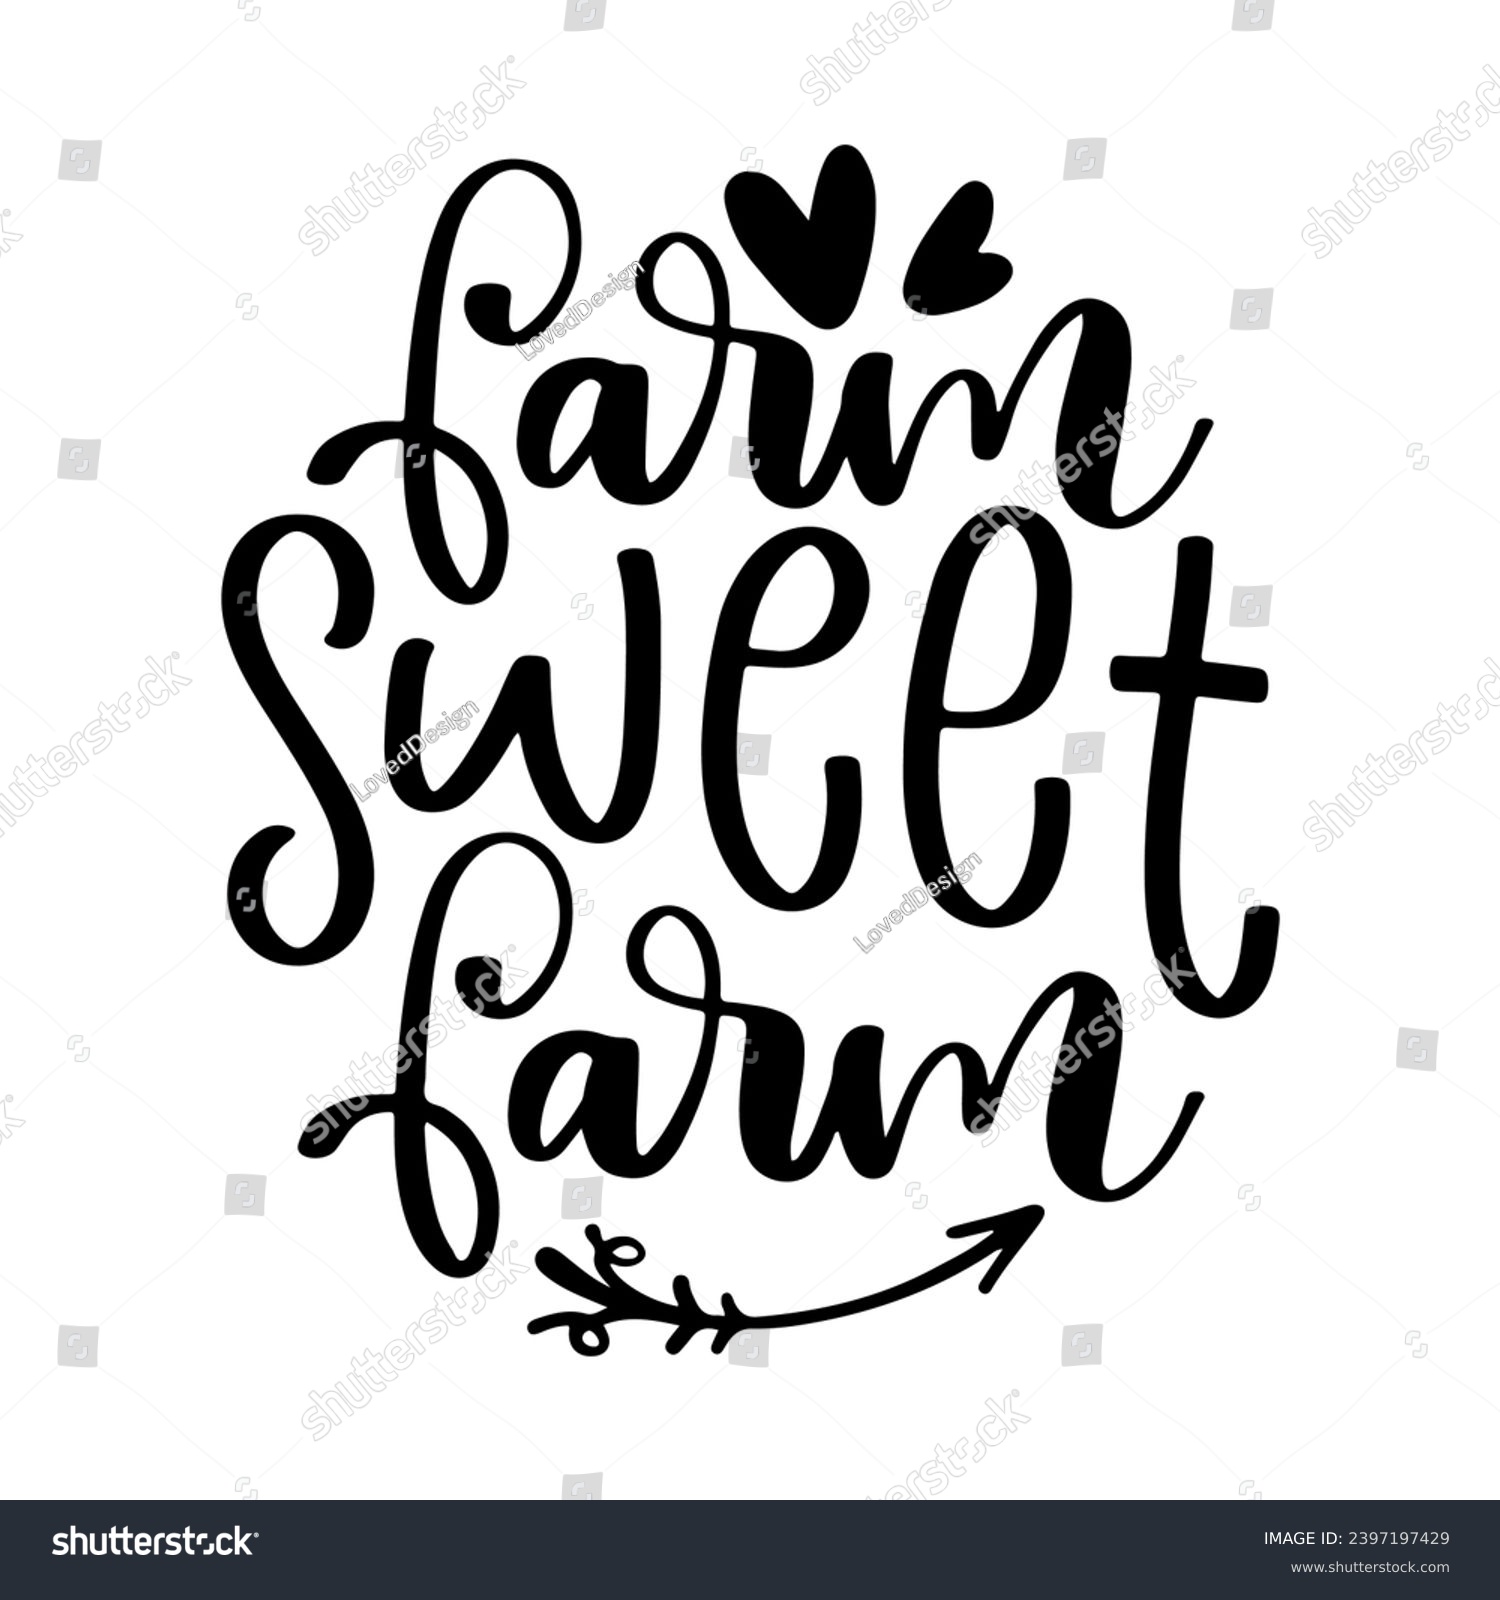 SVG of Farmhouse Lettering Quotes and Phrases For Printable Posters, Cards, Tote Bags Or T-Shirt Design. Funny Farm Quotes And Saying svg